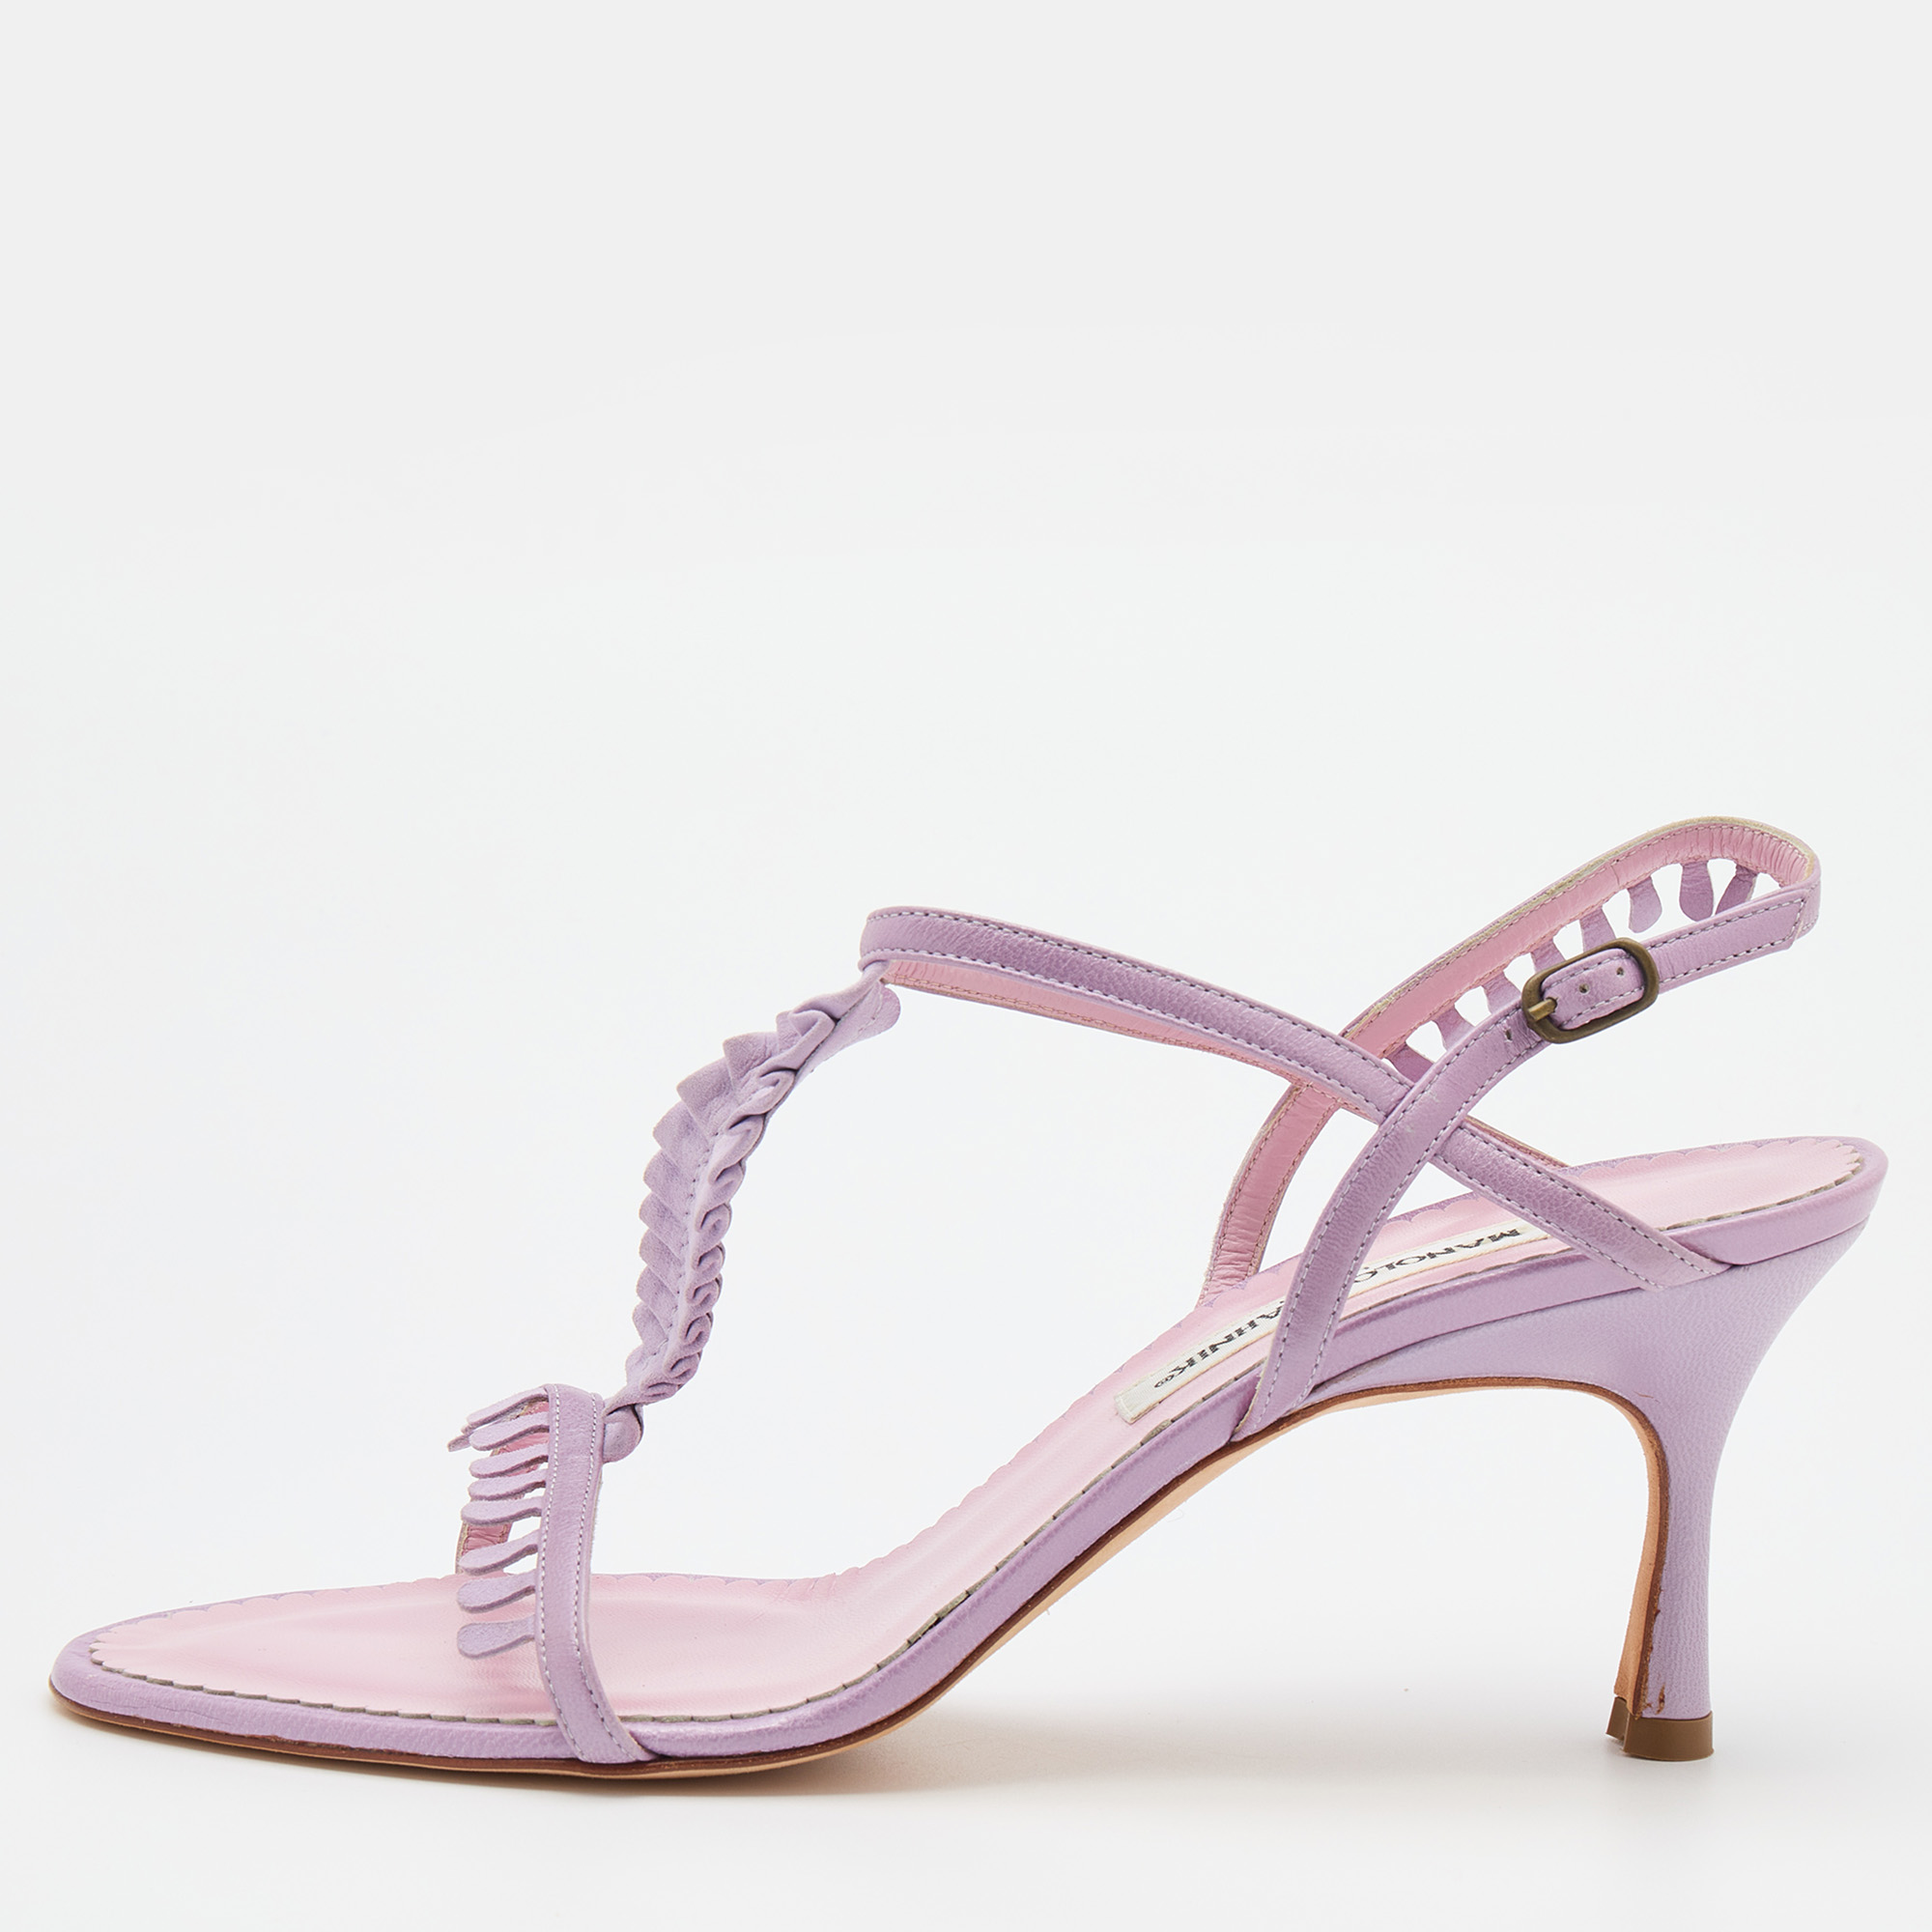 Manolo blahnik lilac leather and suede tigrata strappy sandals size 40.5